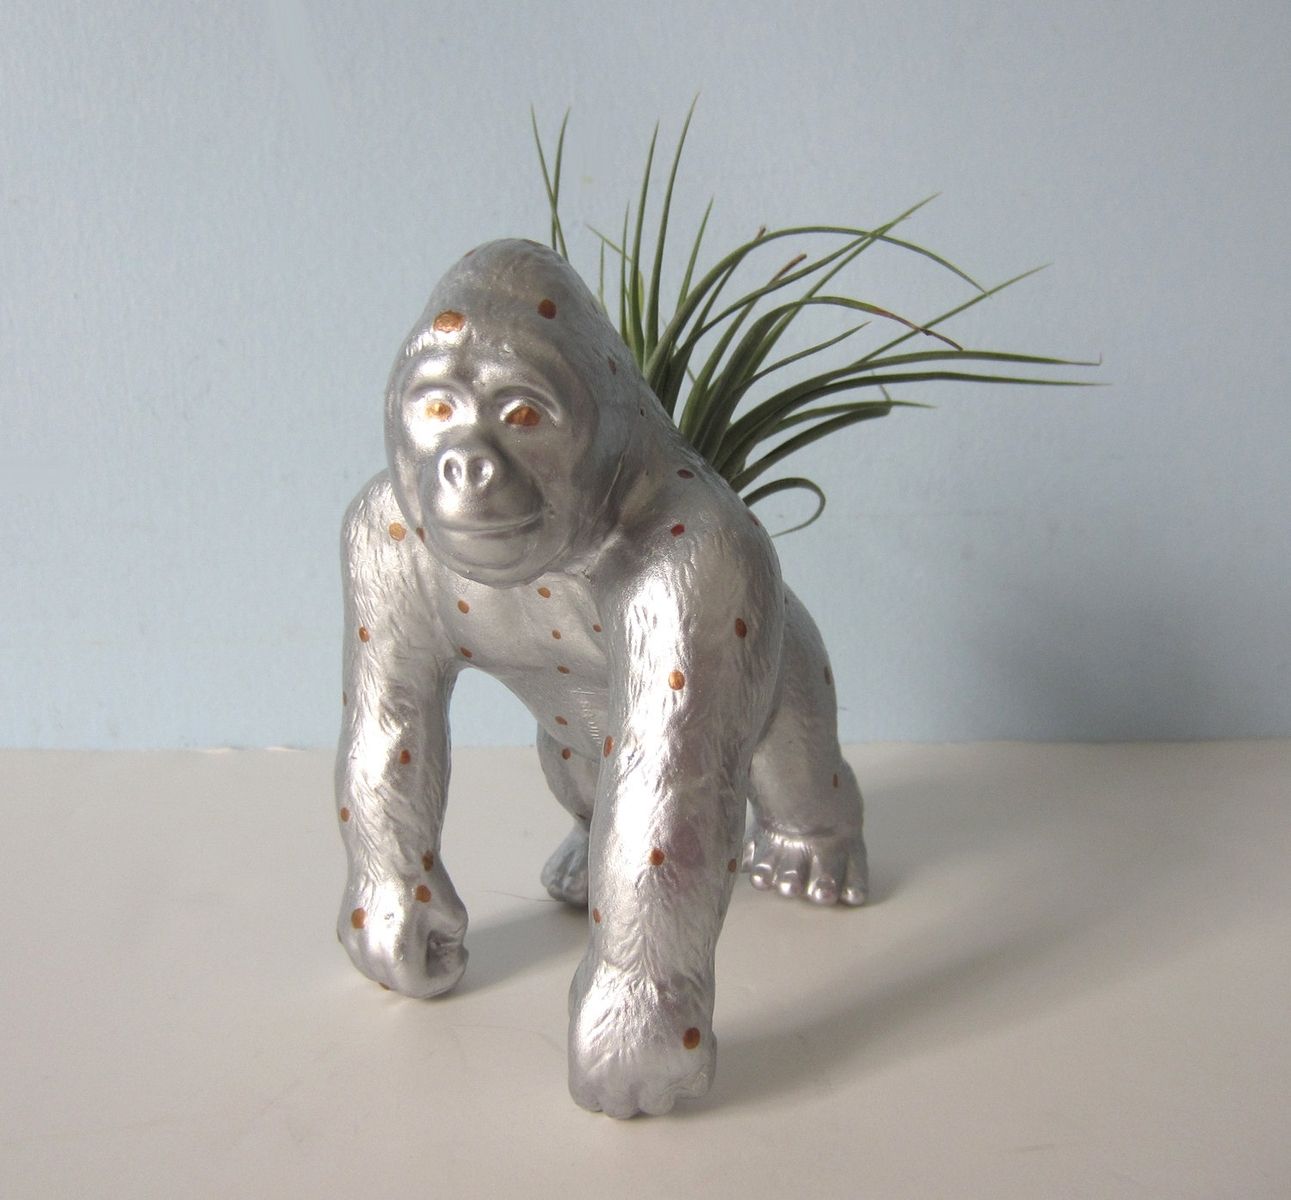 Hand Made Upcycled Toy Planter Large Silver And Gold Polka Dot Gorilla With Air Plant by Found Beauty Studio | CustomMade.com